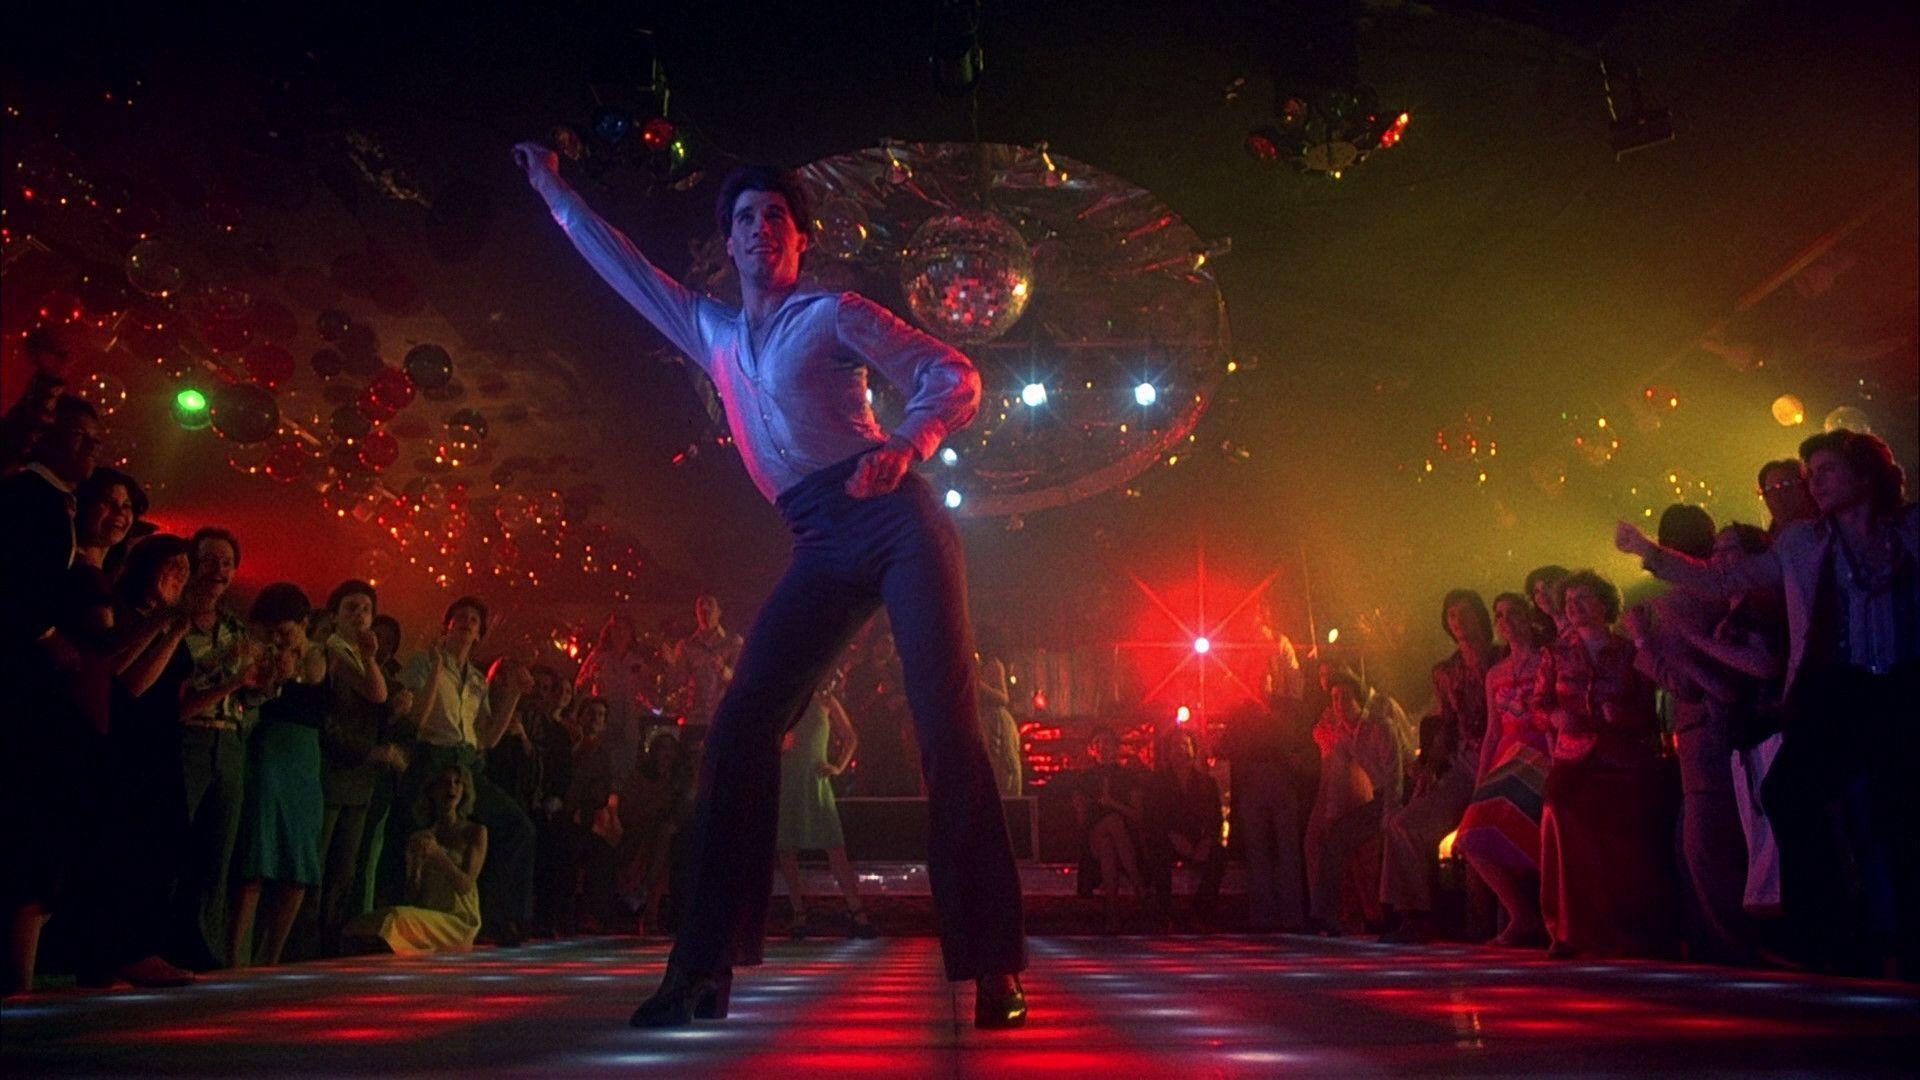 Saturday Night Fever Theme Song. Movie Theme Songs & TV Soundtracks